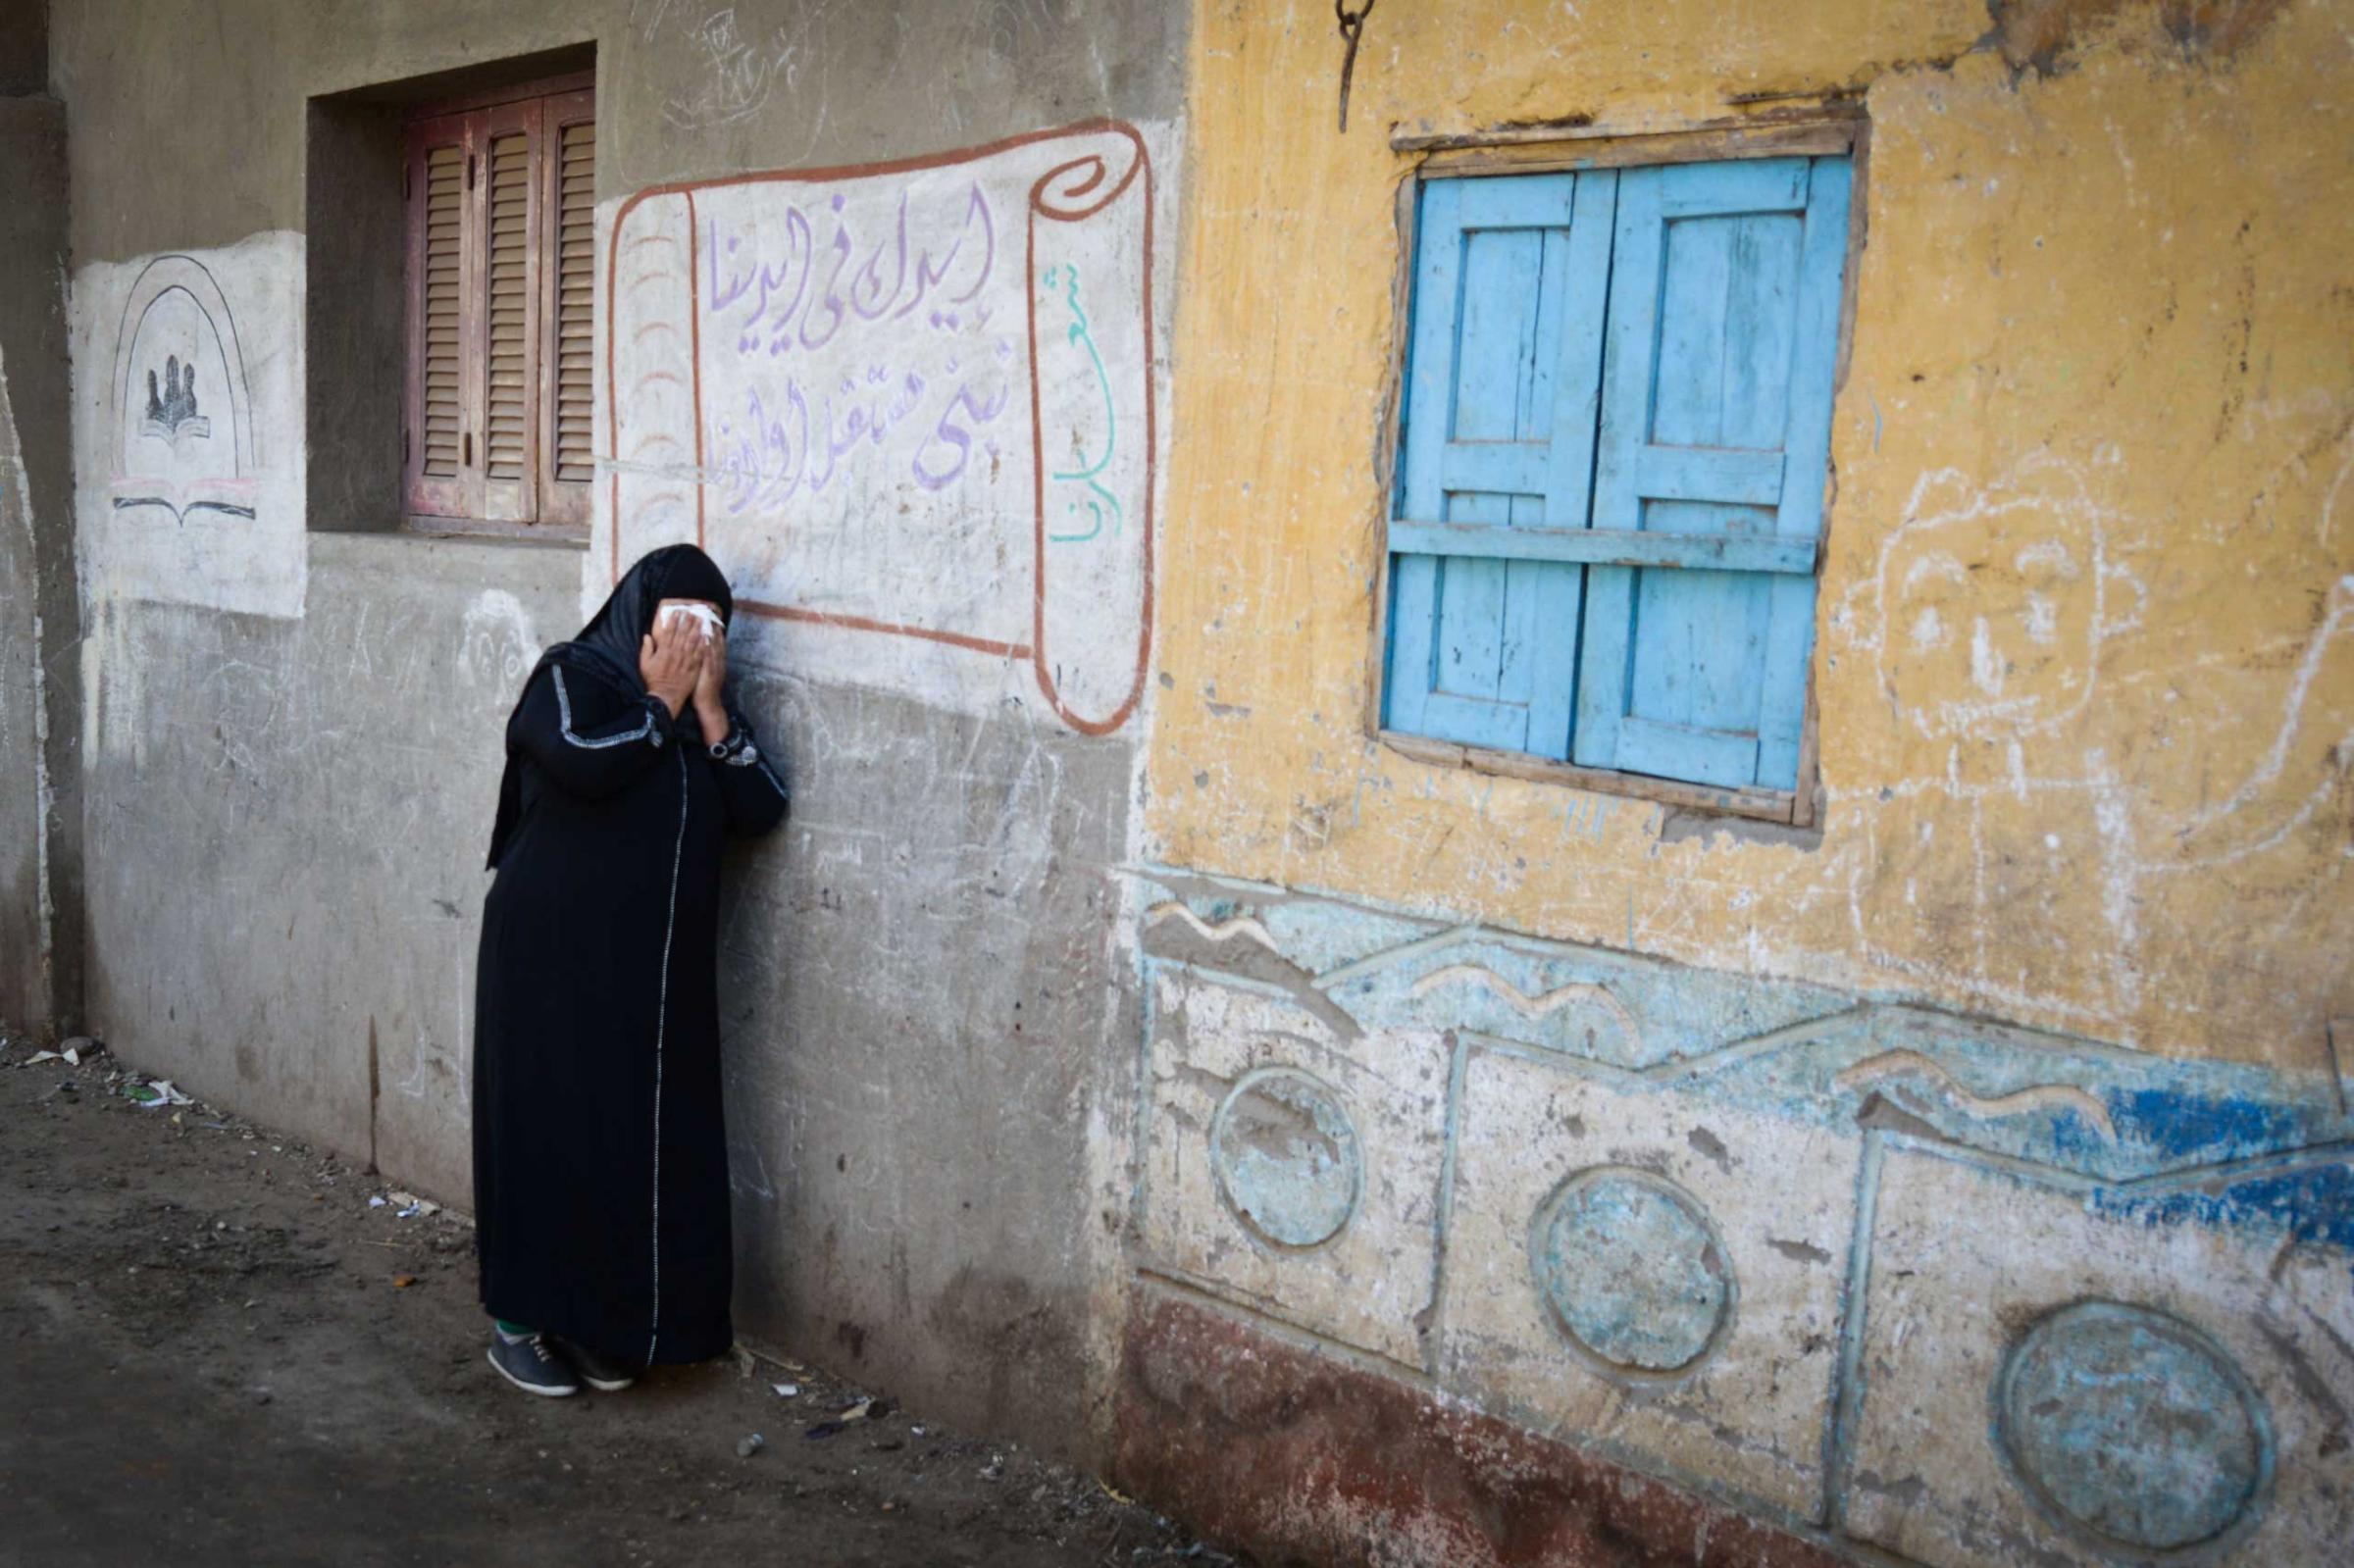 A relative of one of the Egyptian Coptic Christians purportedly killed by ISIS militants in Libya reacts after hearing the news on Feb. 16, 2015 in the village of Al-Awar in Egypt's southern province of Minya.